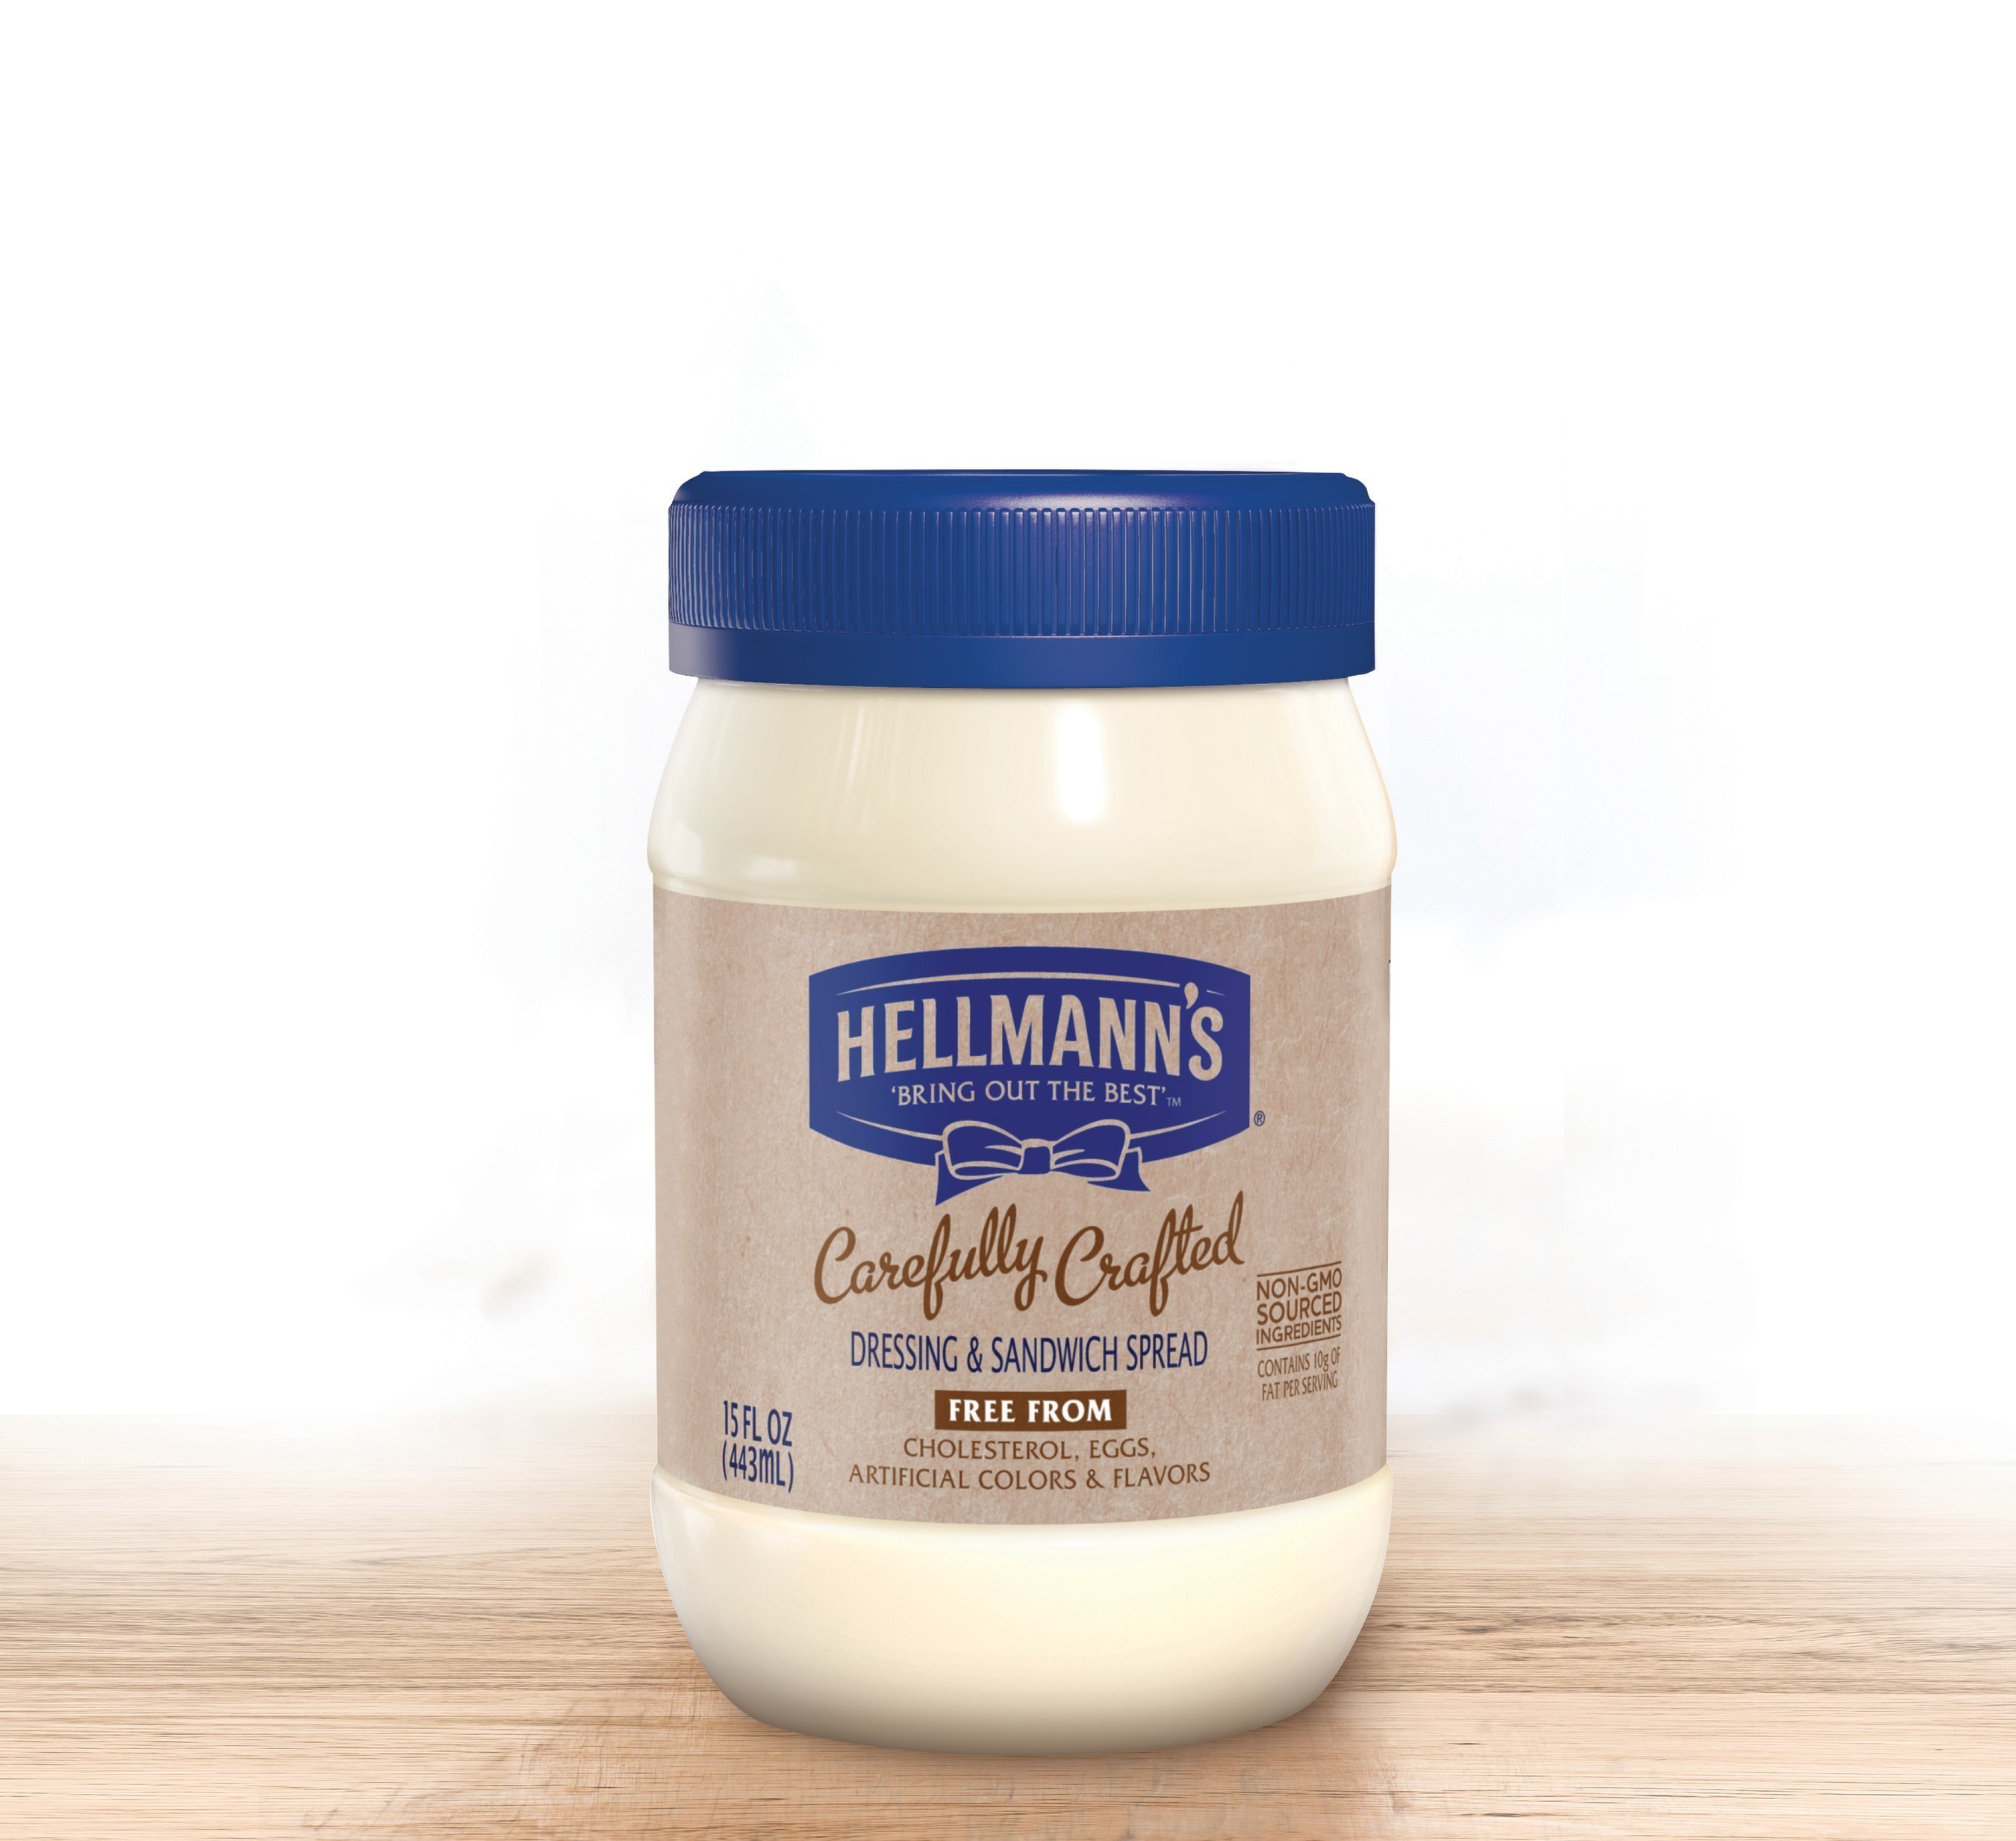 Hellmann's delivers even more choices with the introduction of an eggless spread, Hellmann's Carefully Crafted.